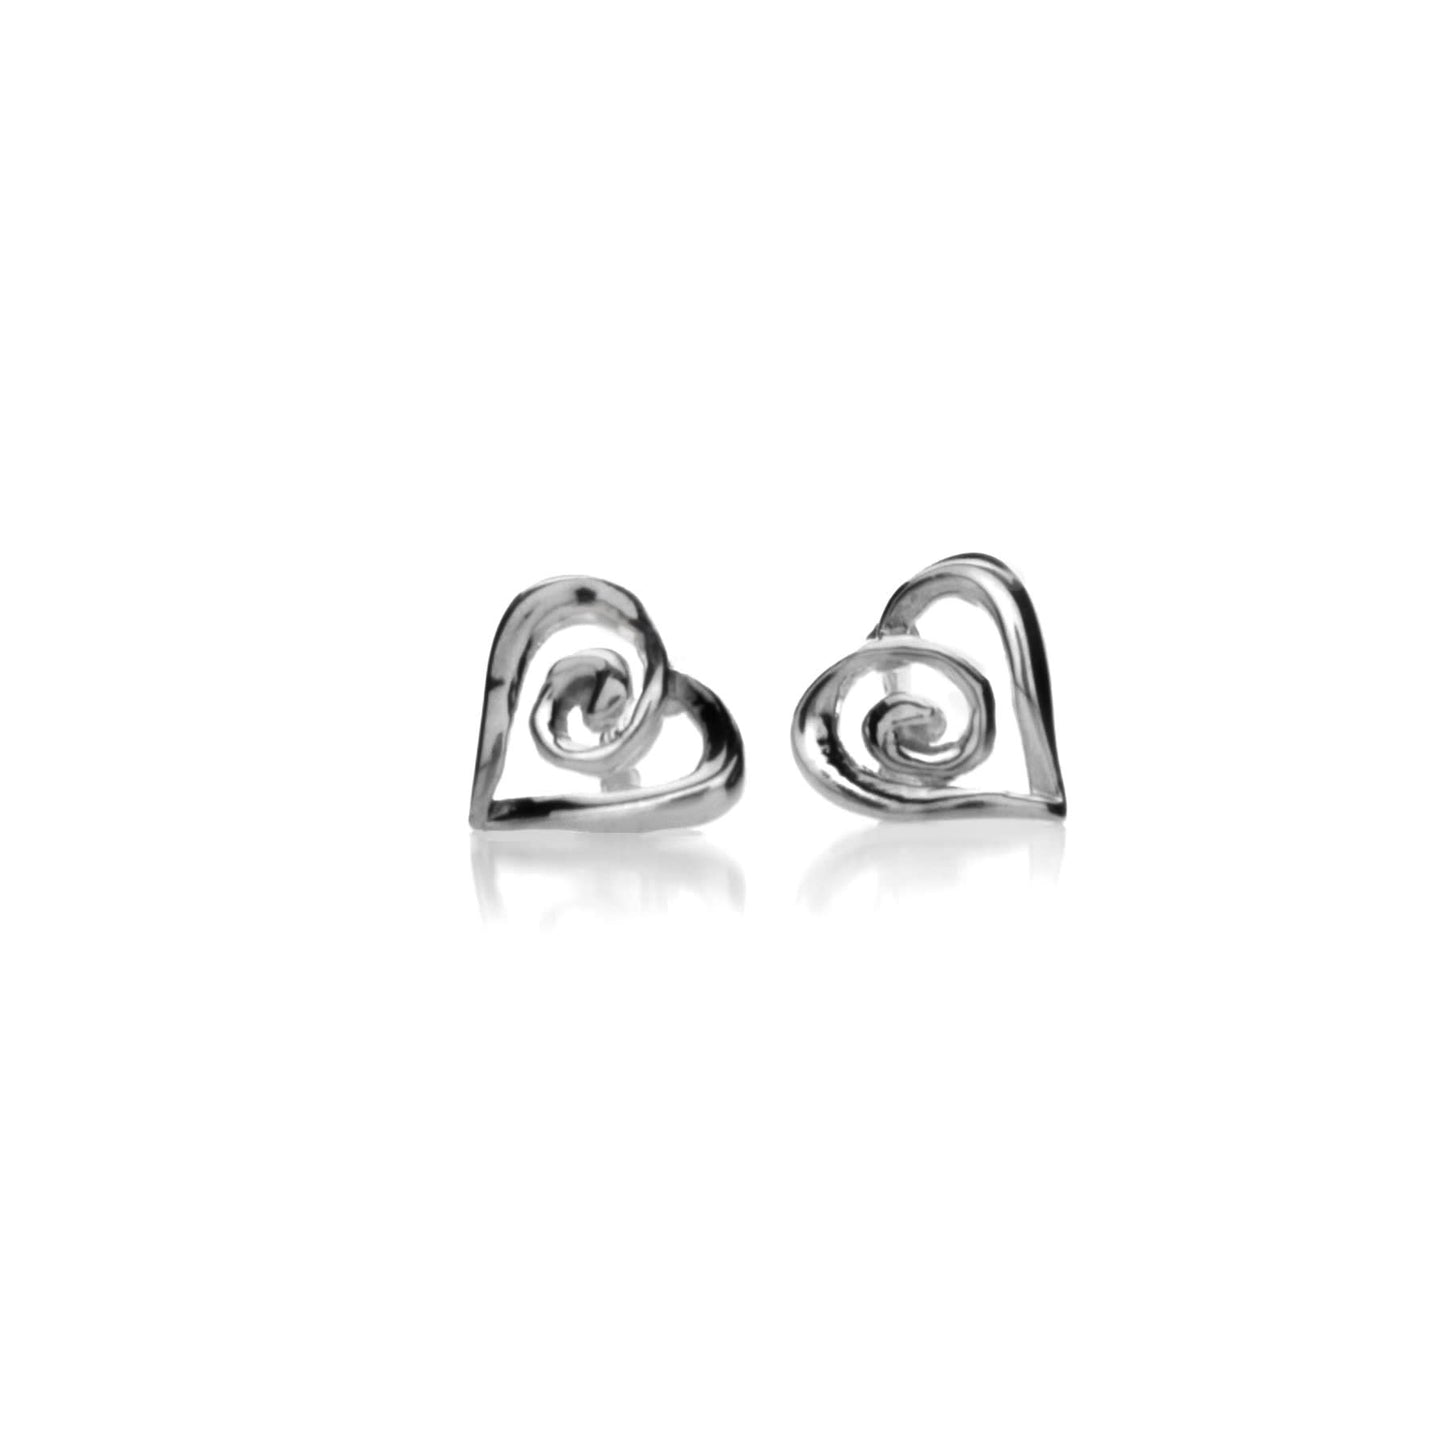 Heart With Spiral Centre Stud Earrings - The Christian Gift Company